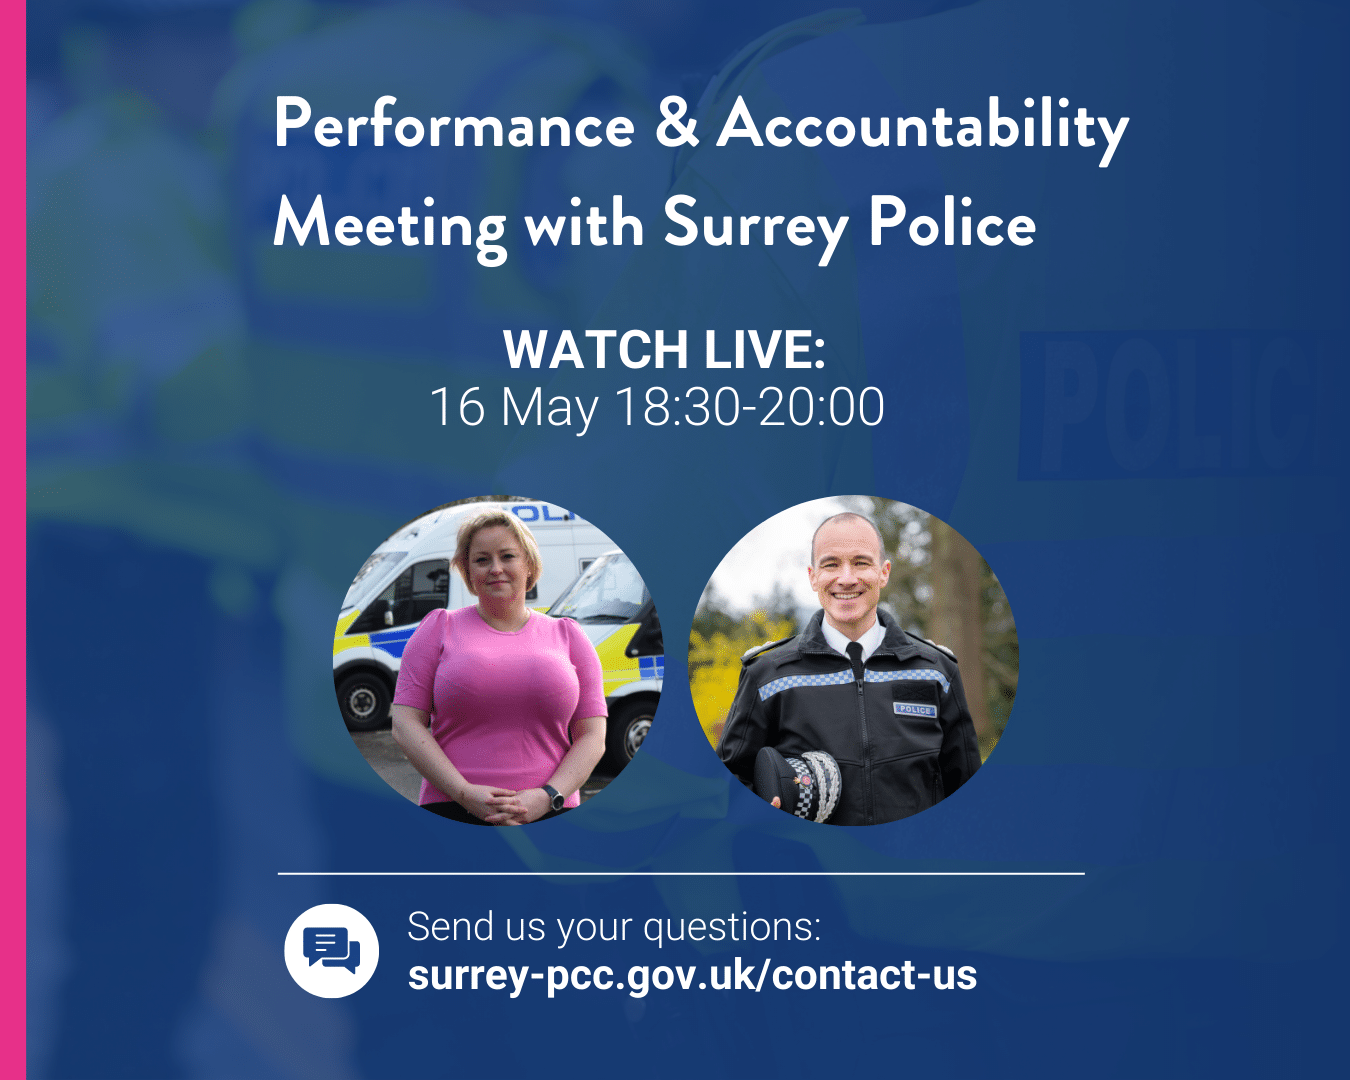 Performance and accountability meeting with Surrey Police. Watch Live 16 May 18:30-20:00. Send us your questions at surrey-pcc.gov.uk/contact-us